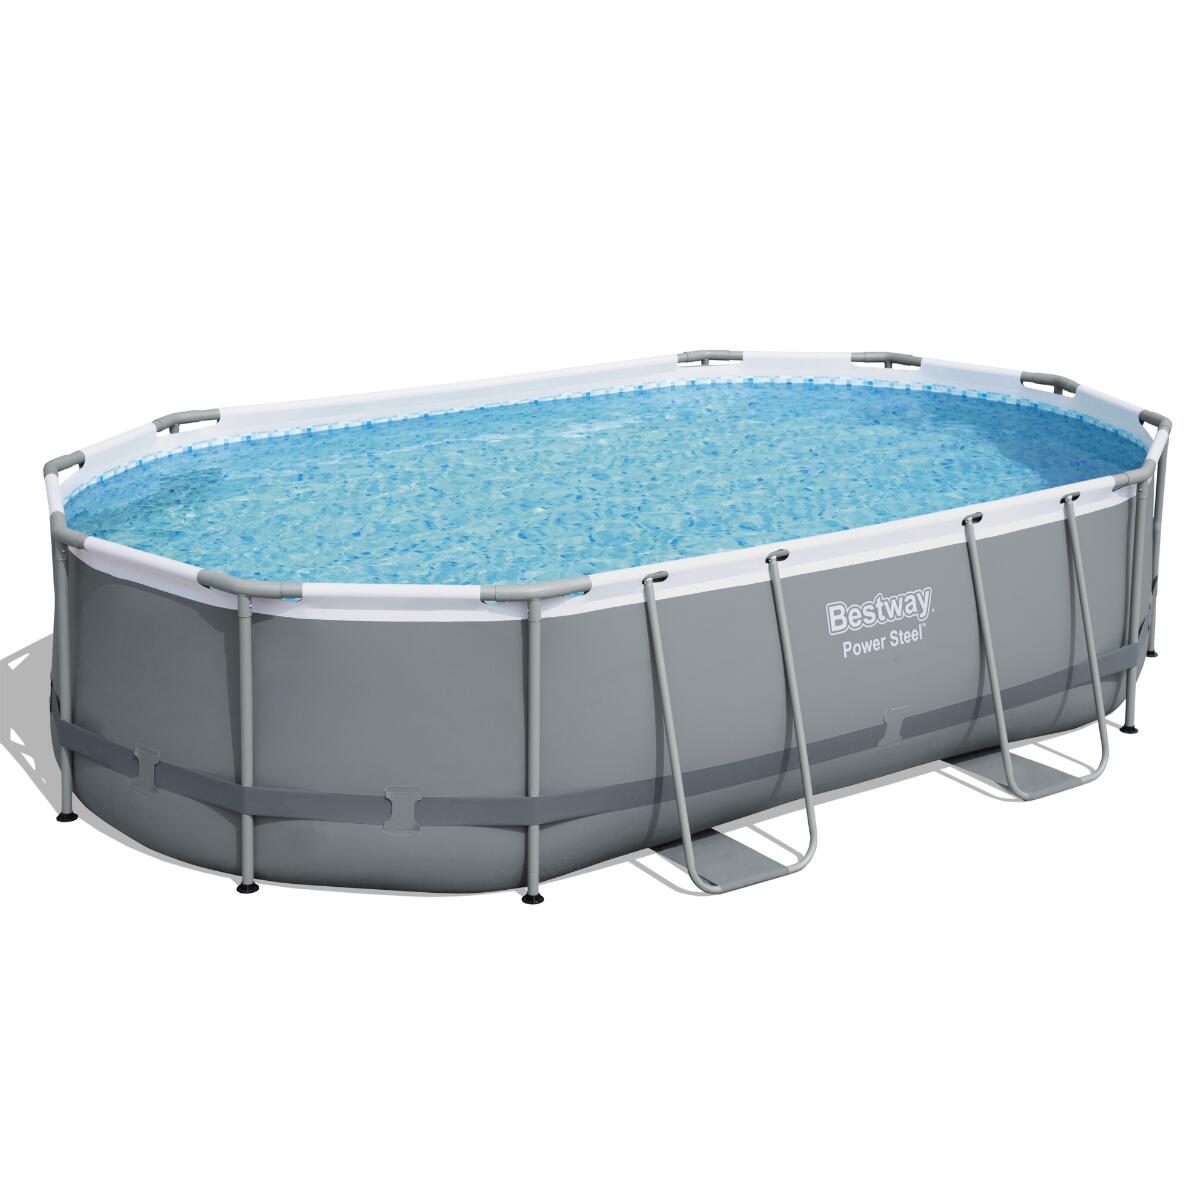 Bestway 16ft x 10ft x 42" Oval Power Steel Above Ground Pool 1/7